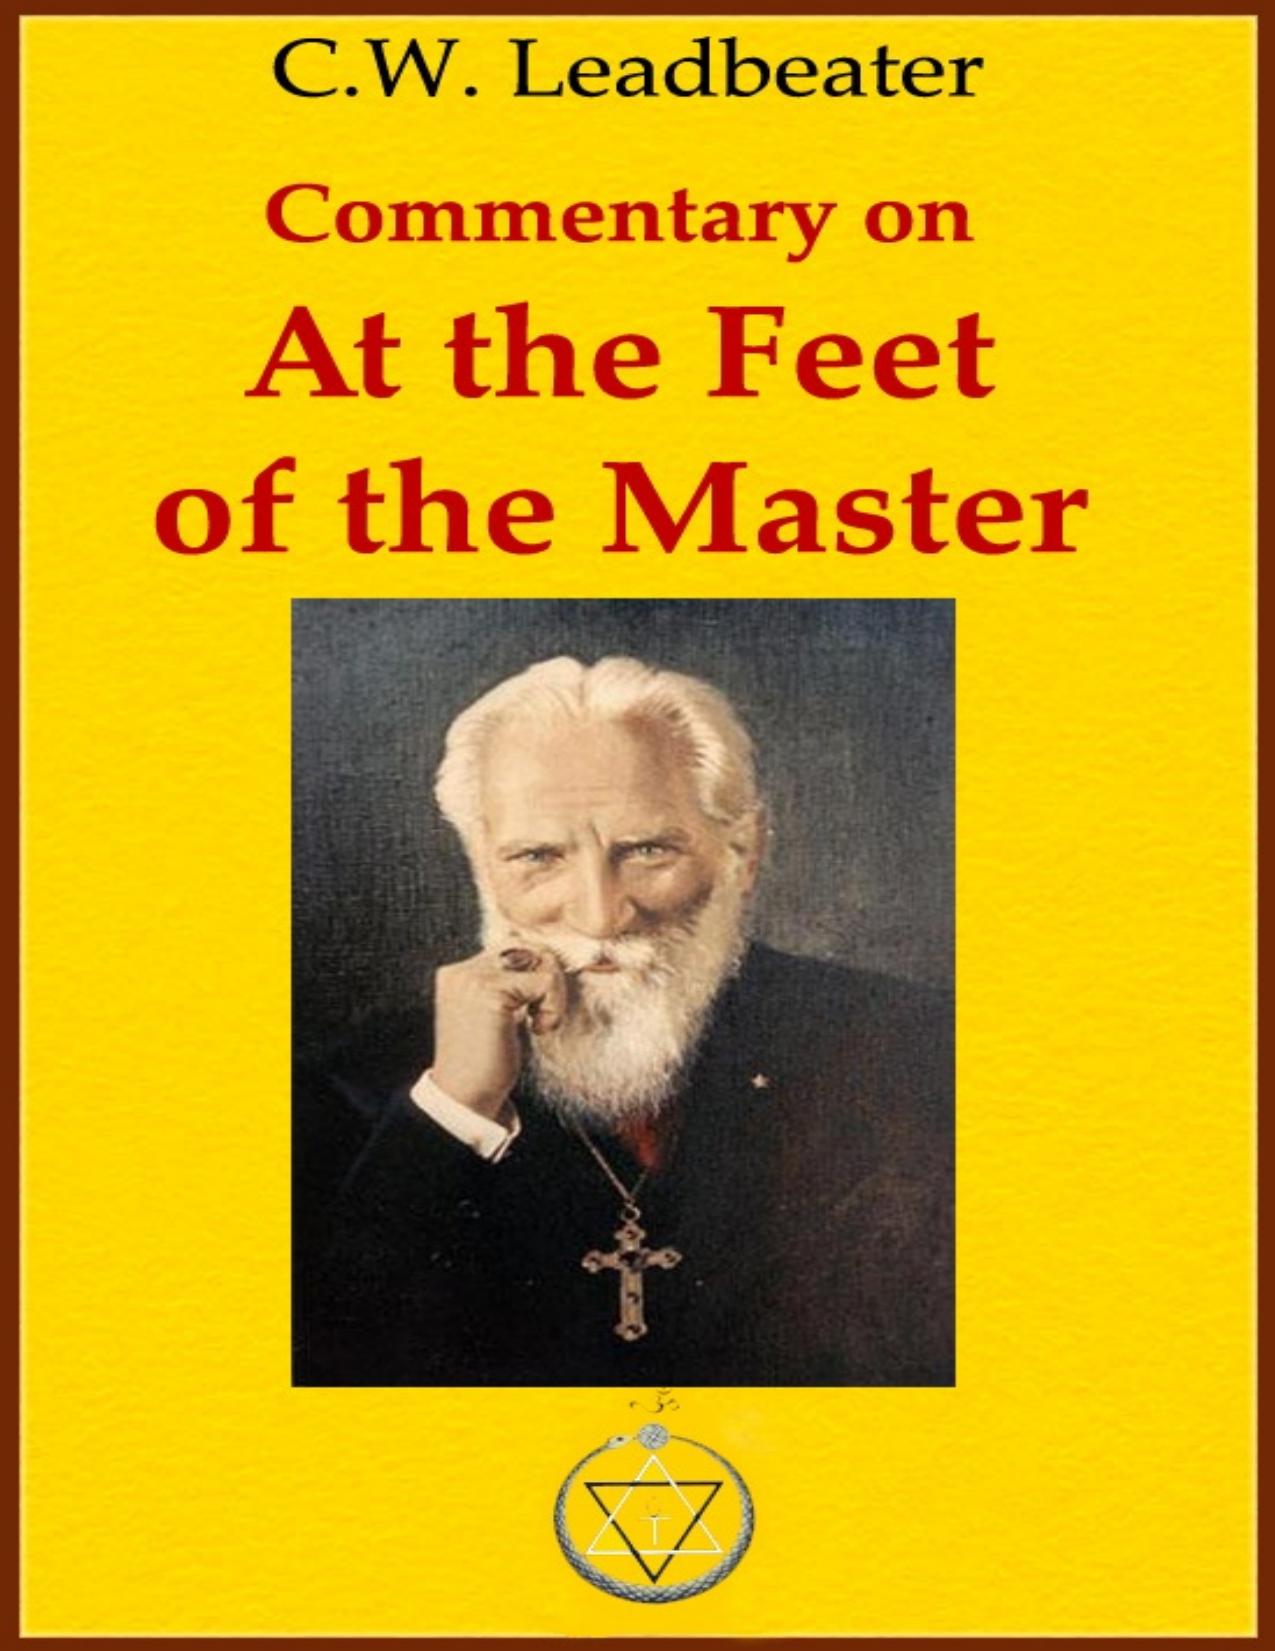 Commentary on "At the Feet of the Master"